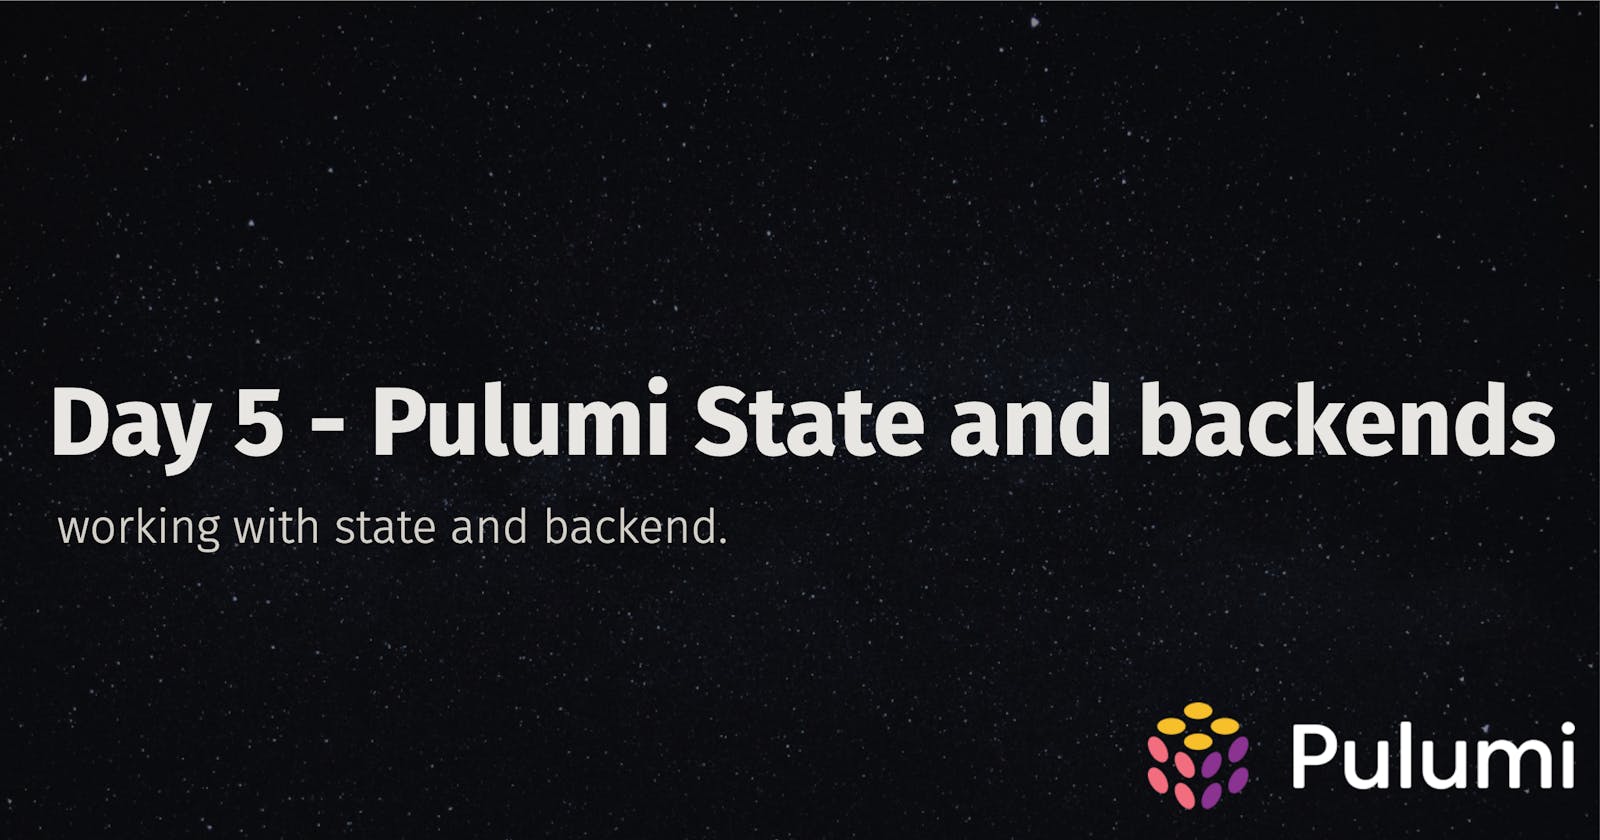 Day 5 - Pulumi State and Backends.